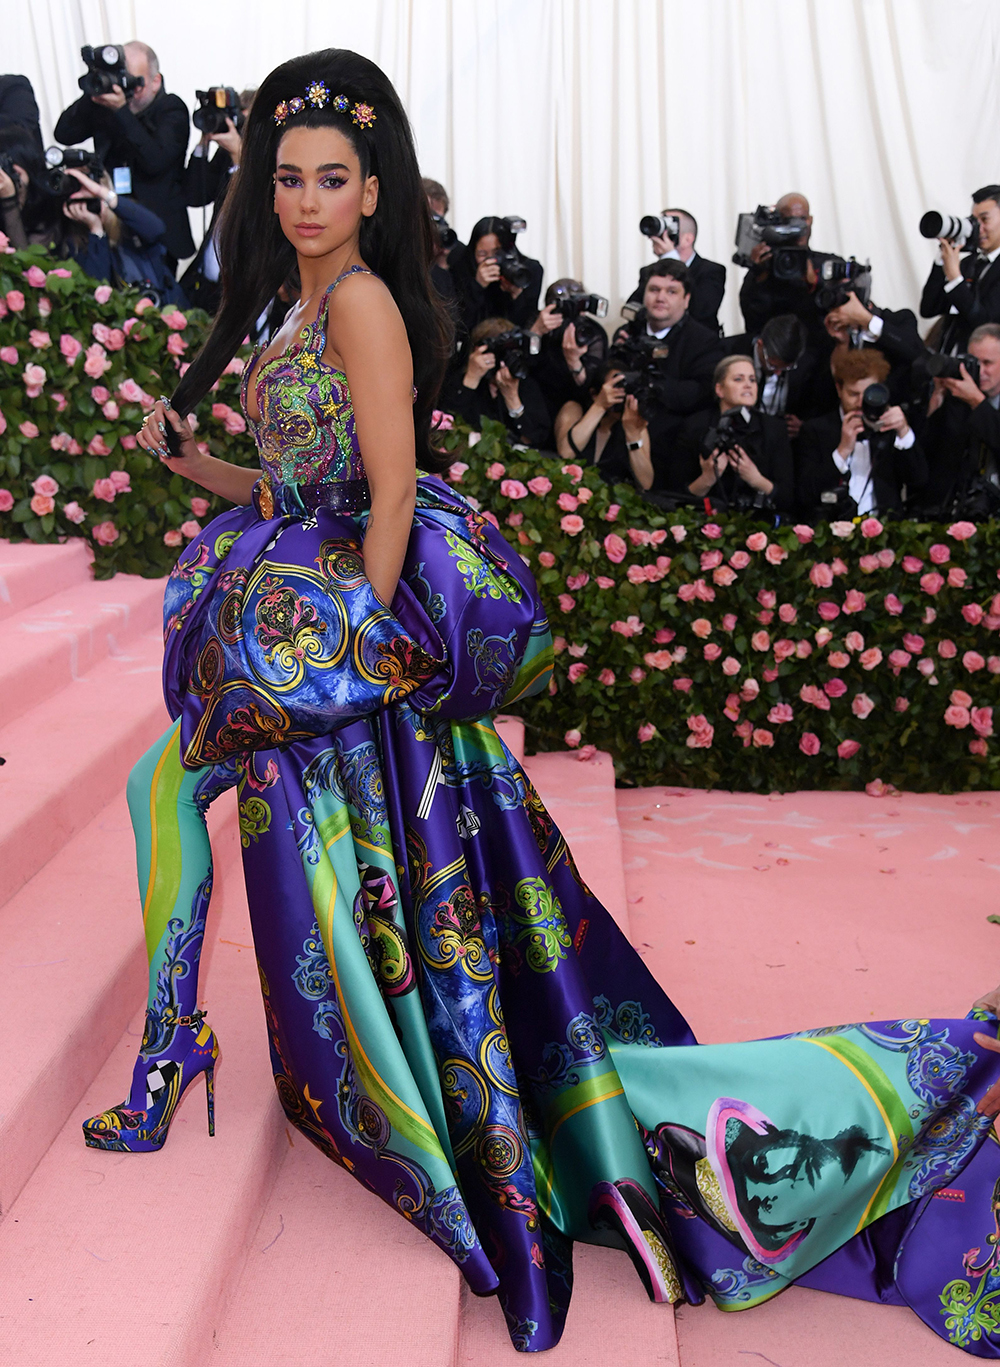 Met Gala 2019 Fashion: The Most Mind-Blowing Looks | About Her